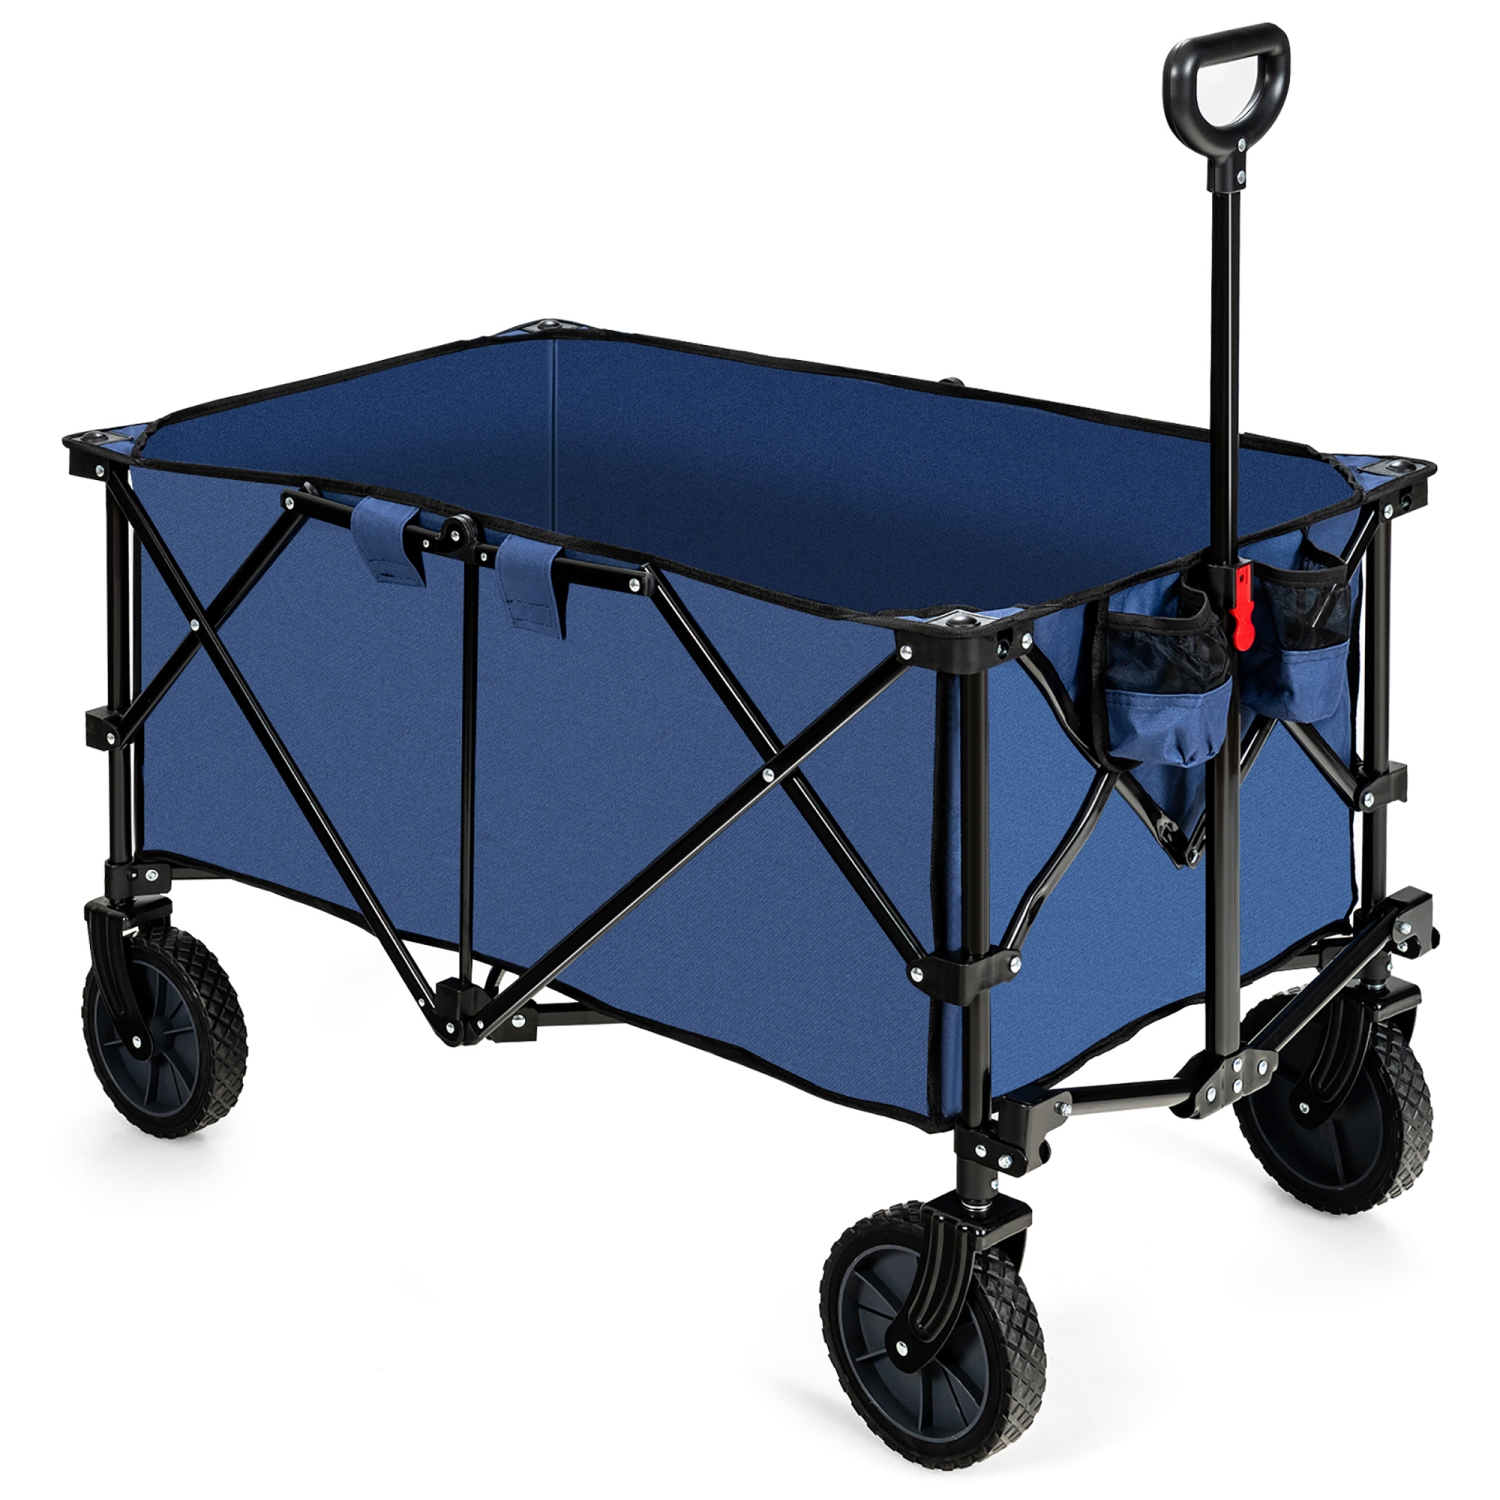 Costway Folding Collapsible Wagon Utility Camping Cart W/Wheels & Adjustable Handle